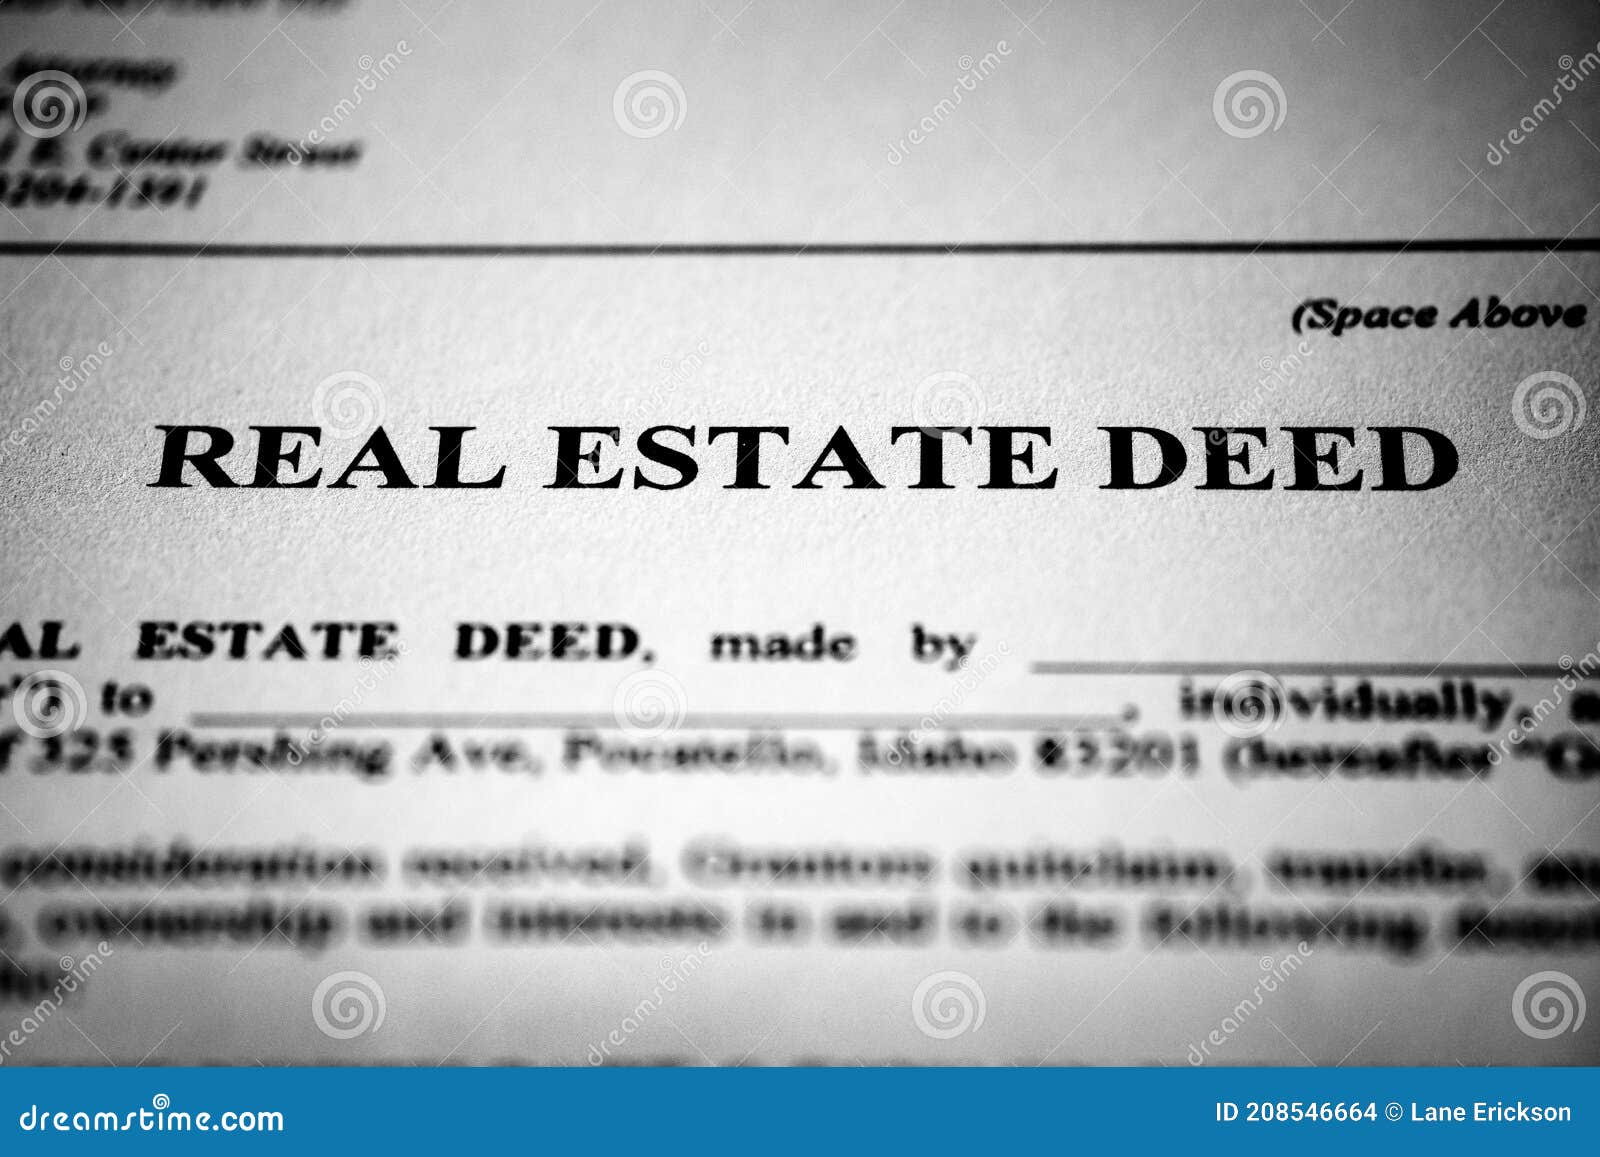 real estate deed transfer of land or property